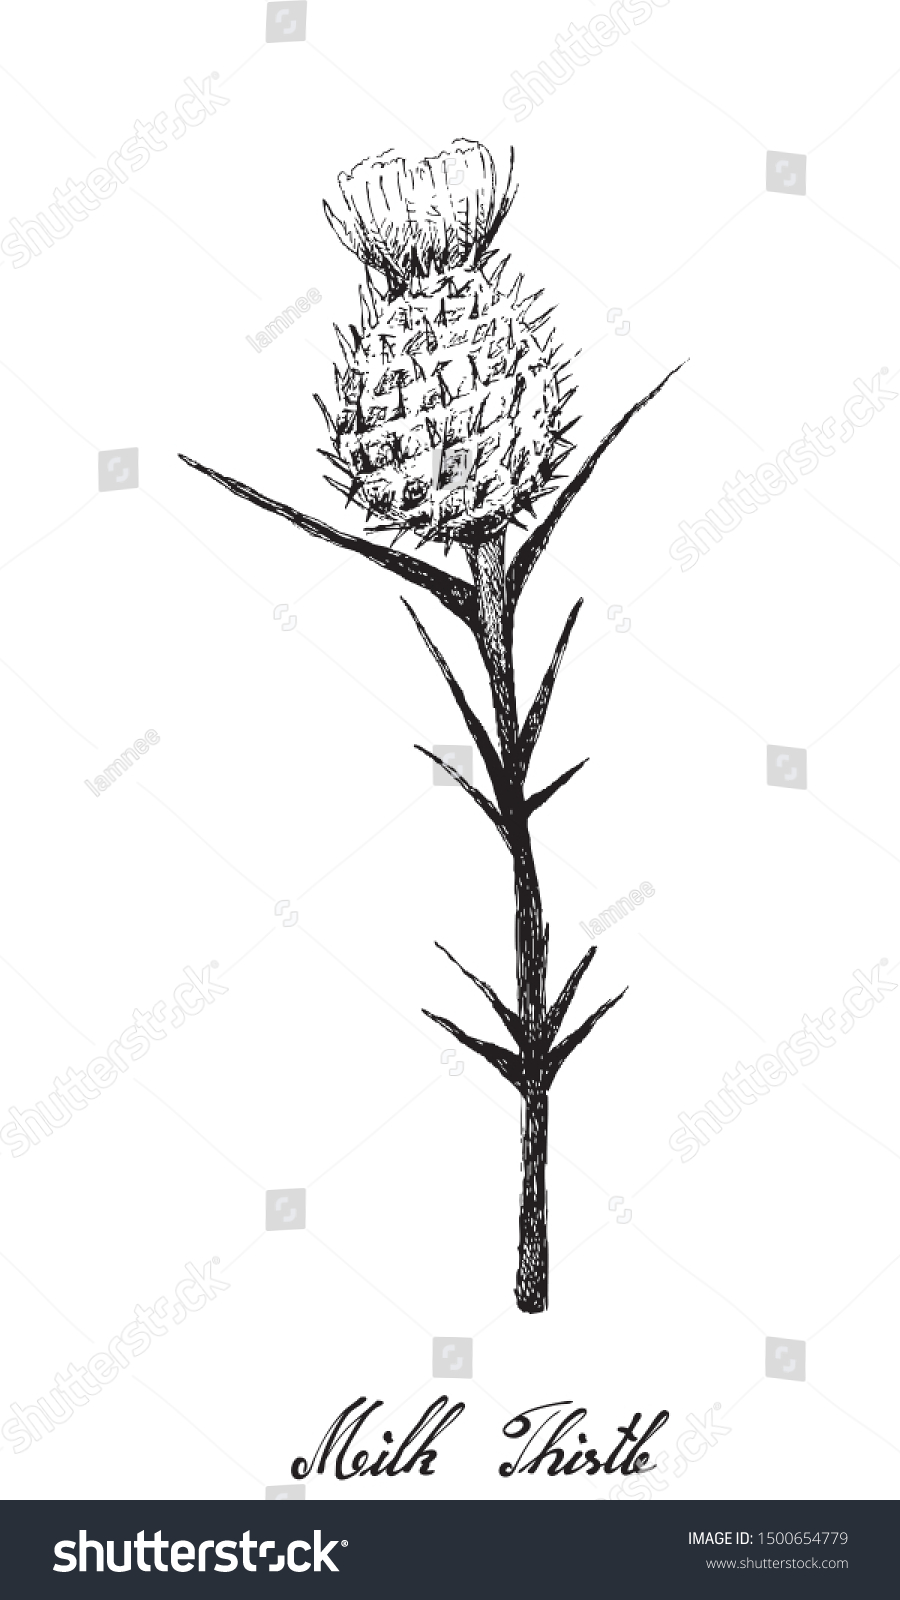 SVG of Herbal Flower and Plant, Hand Drawn Illustration of Silybum Marianum, Cardus Marianus or Milk Thistle Plant, Used to Treat Alcoholic Liver Disease and Gallbladder Problems.  svg